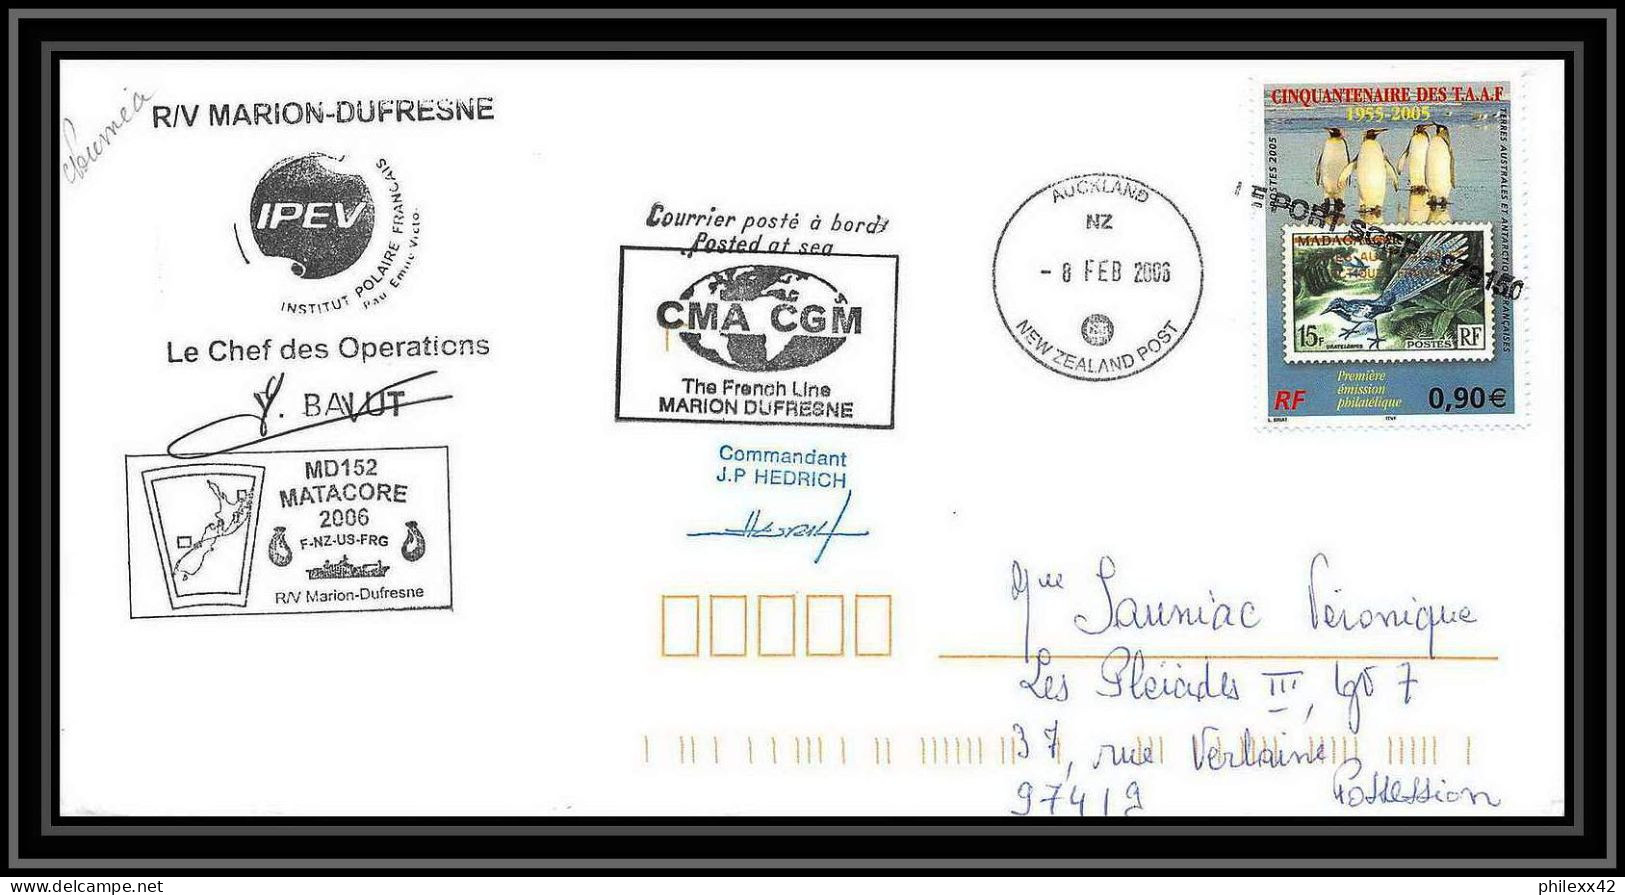 2560 ANTARCTIC NOUMEA Caledonie-Lettre Cover Dufresne 2 Signé Signed Md 152 8/2/2006 N°430 Obl Griffe - Antarctic Expeditions